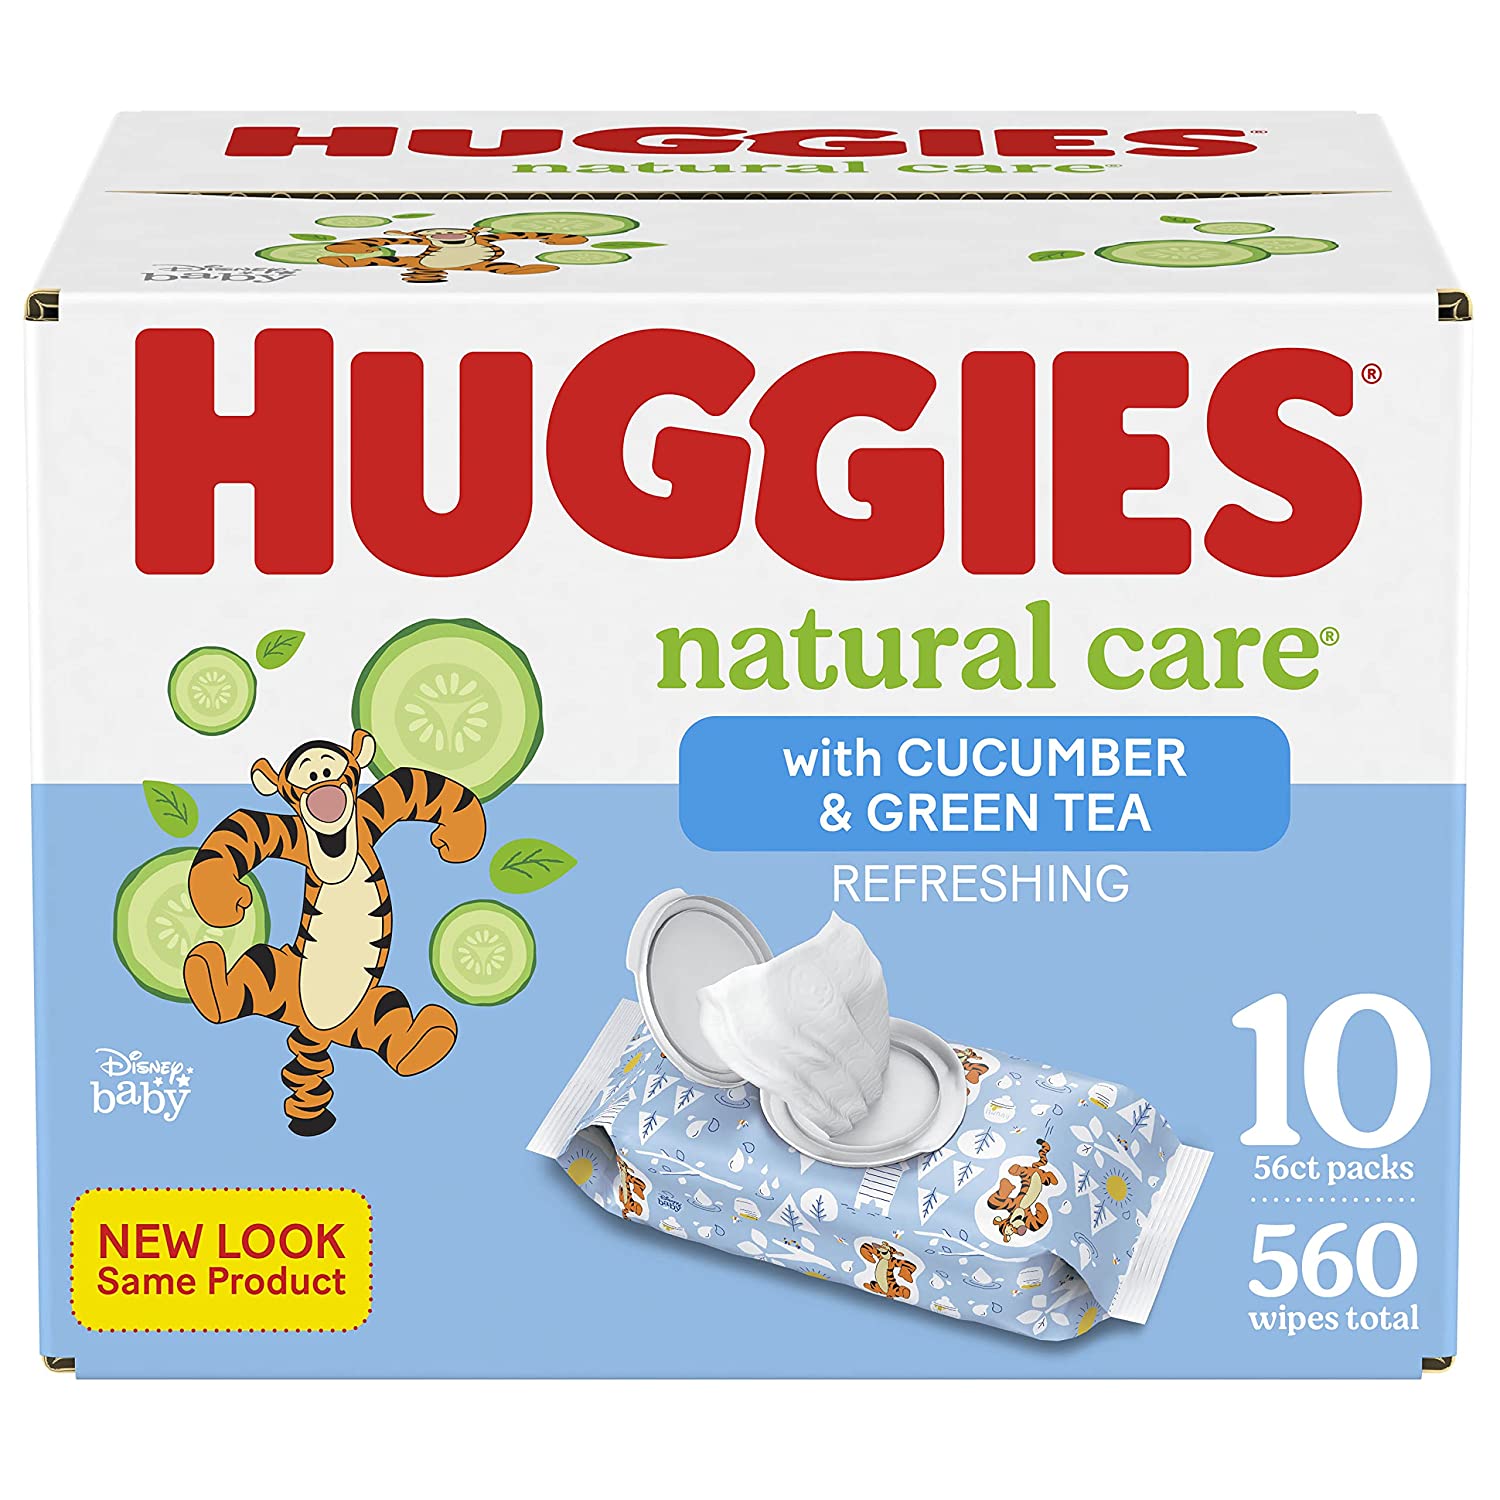 560-Count Huggies Natural Care Refreshing Baby Wipes (Cucumber/Green Tea) $11.46 w/ S&S + Free Shipping w/ Prime or on orders over $25